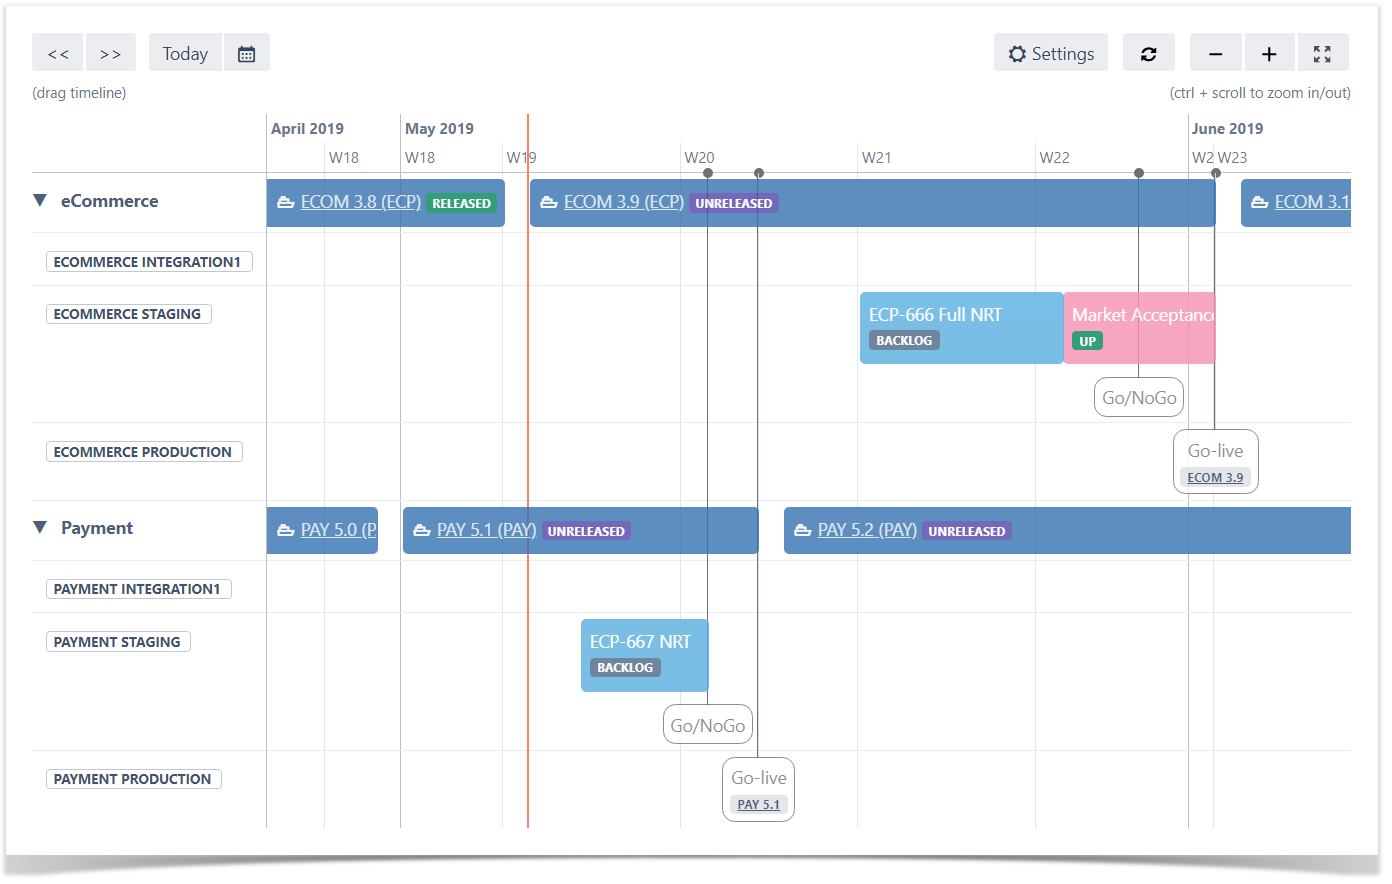 Show releases in a calendar view